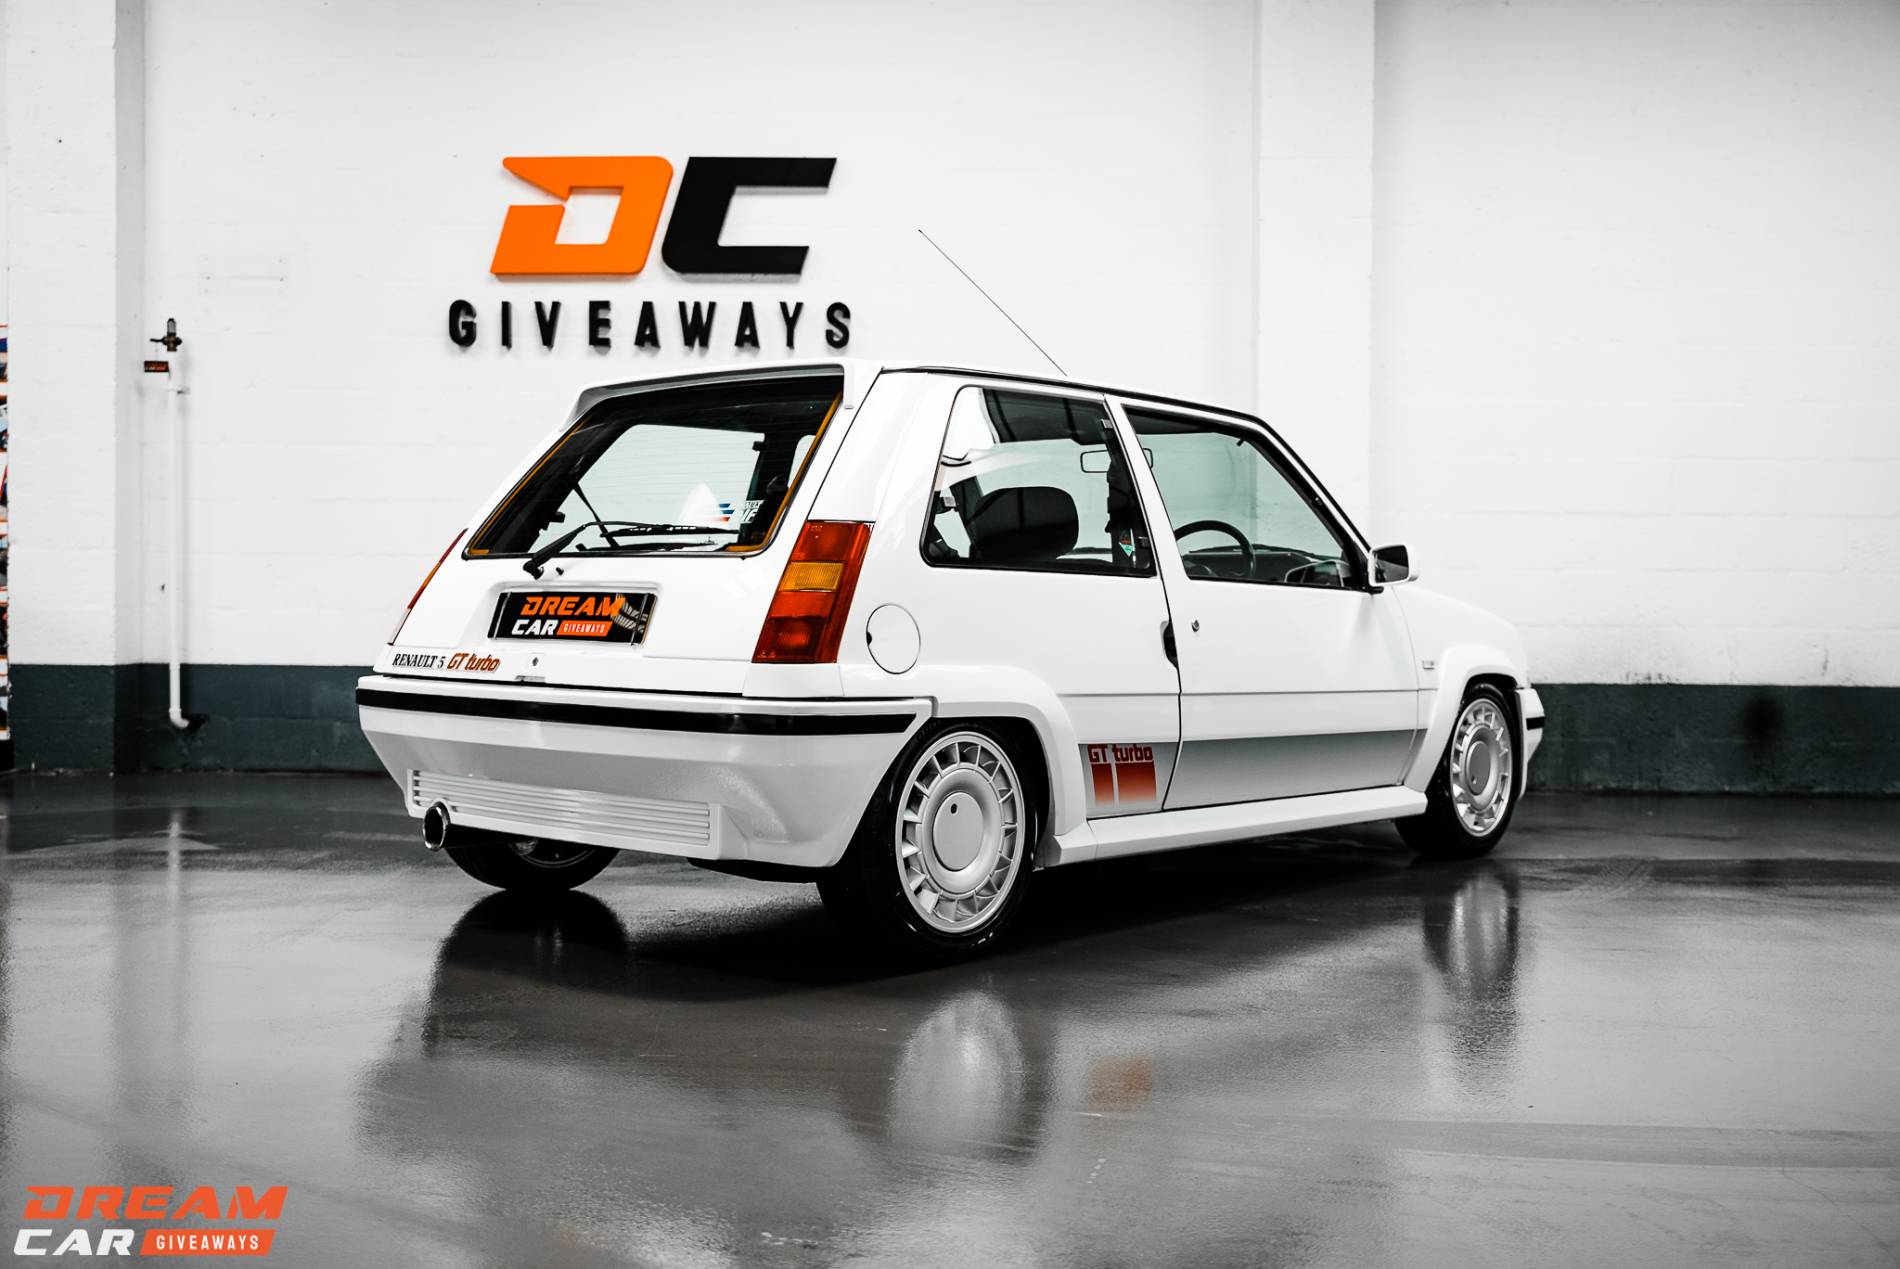 1990 White Renault 5 GT Turbo - Rear, A hot hatch version…